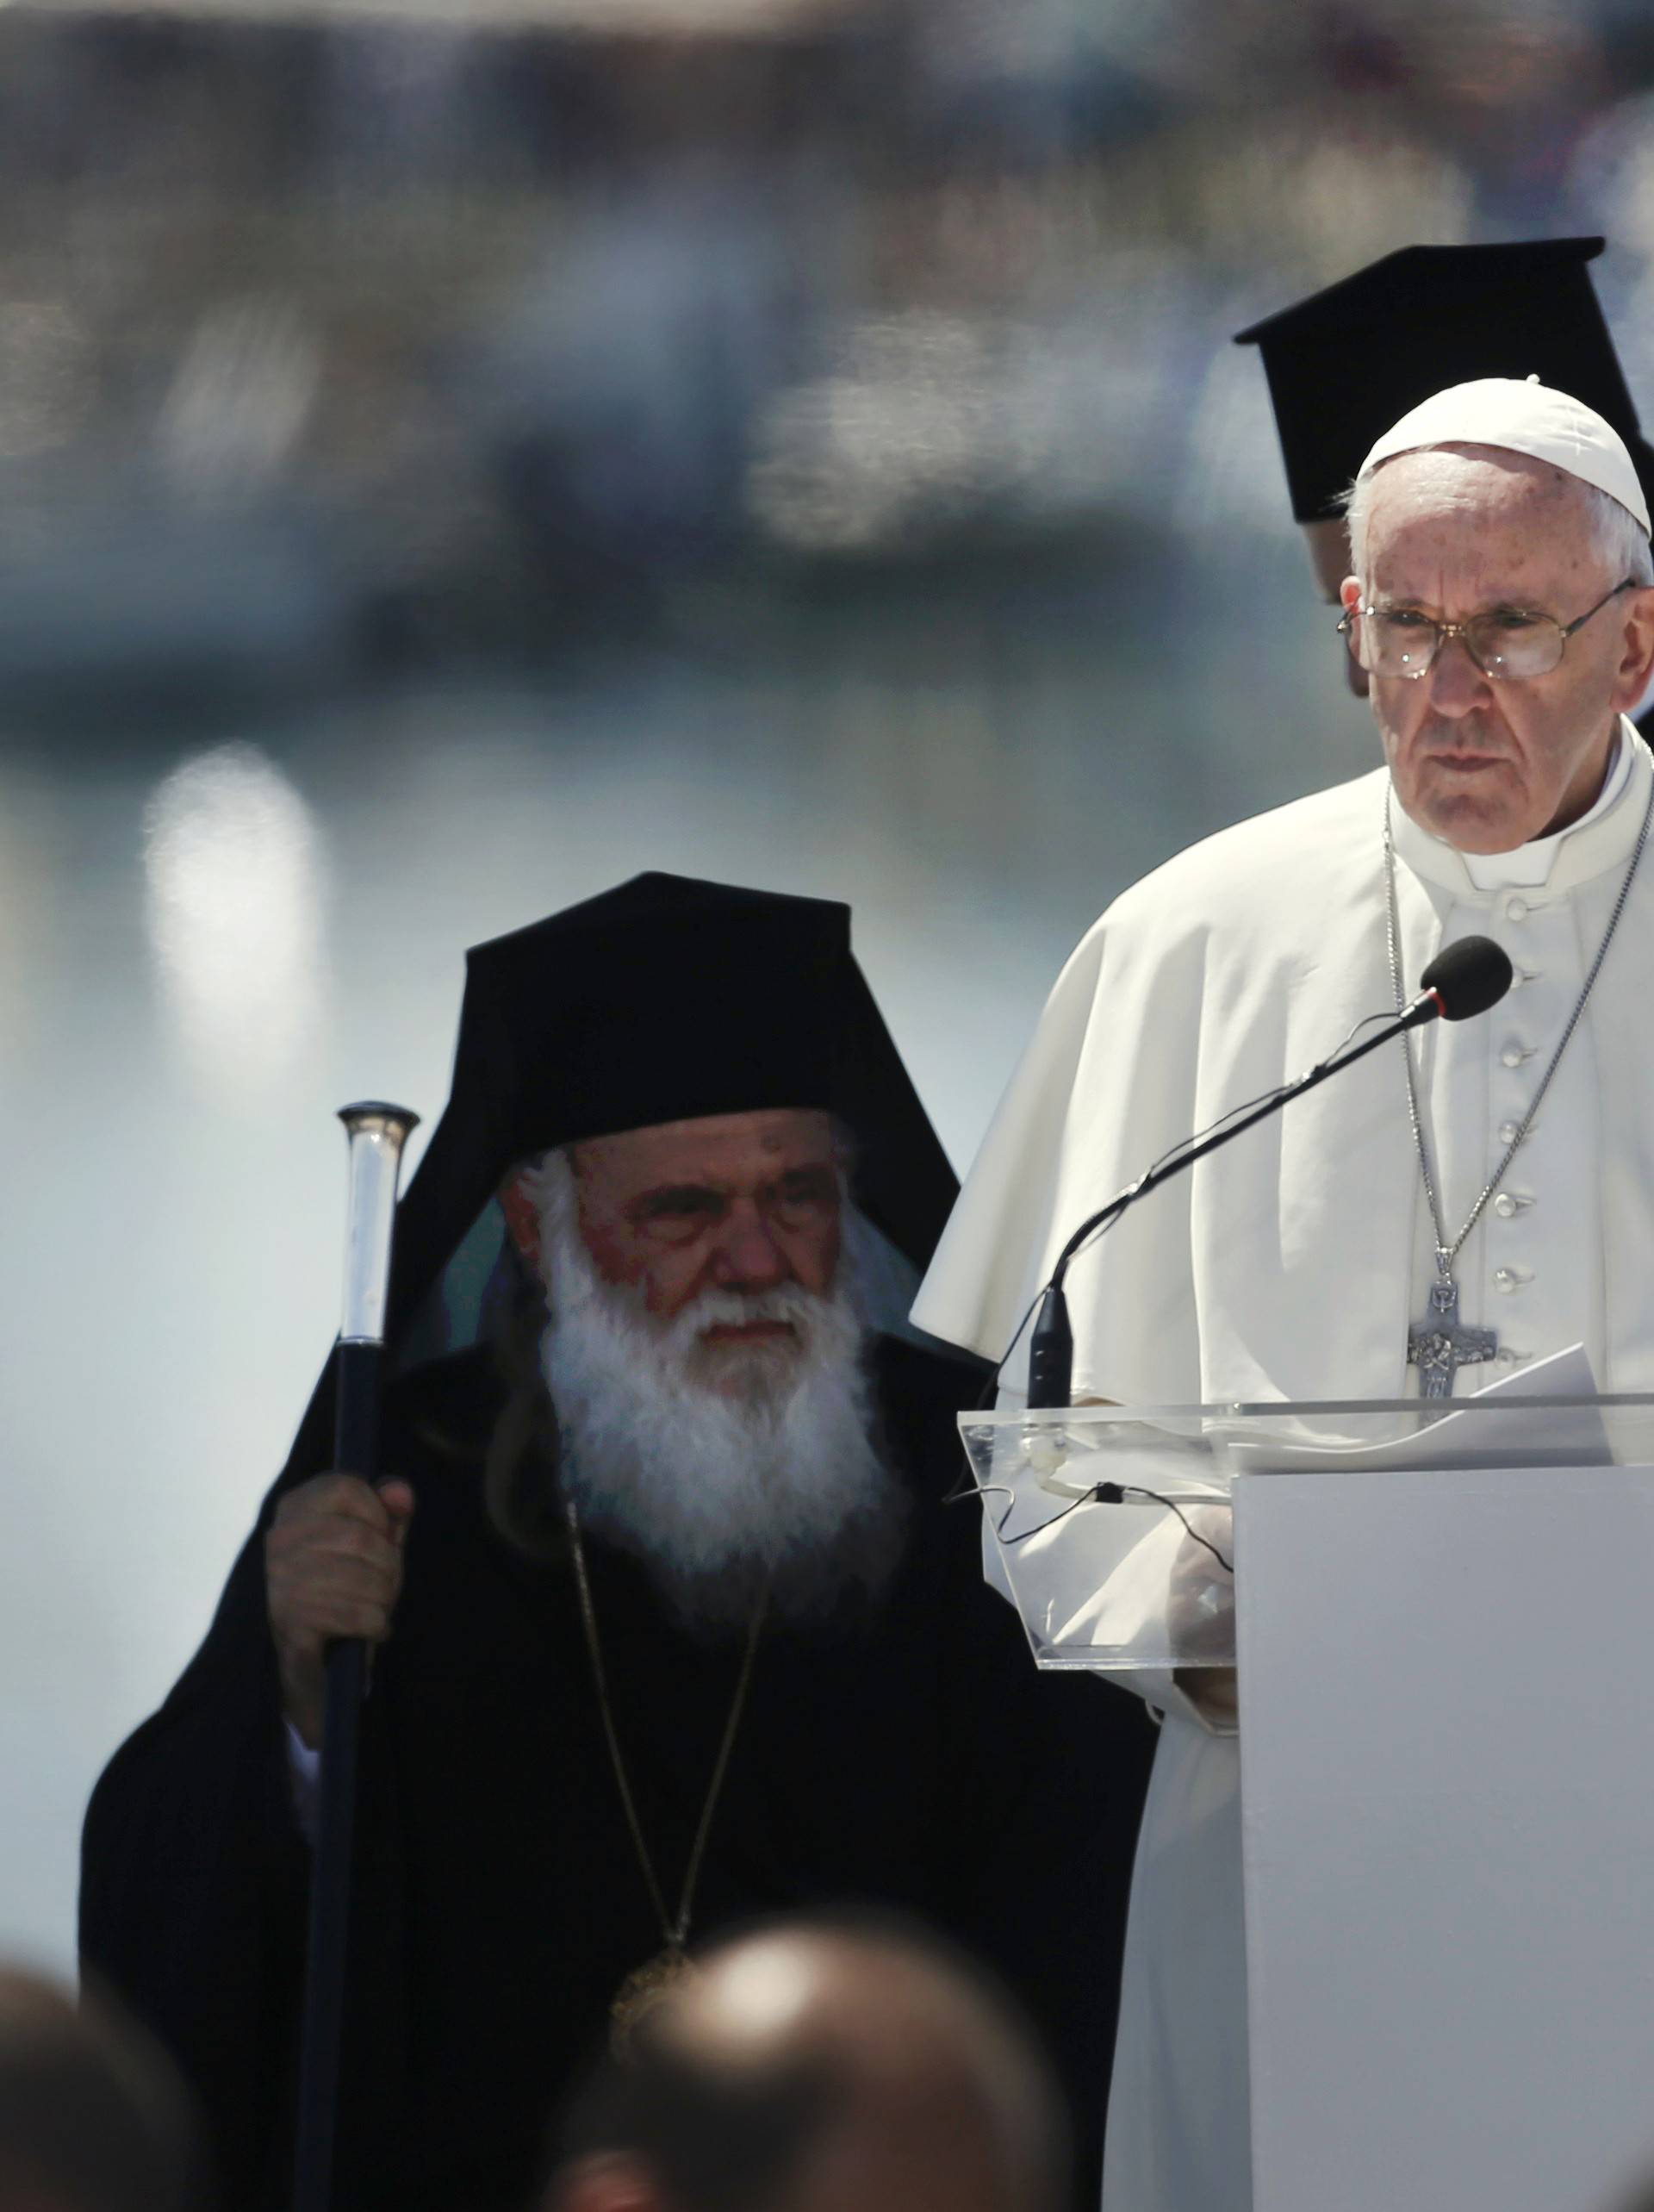 Pope Francis delivers his address at the port of Lesbos during his visit the Greek Island of Lesbos